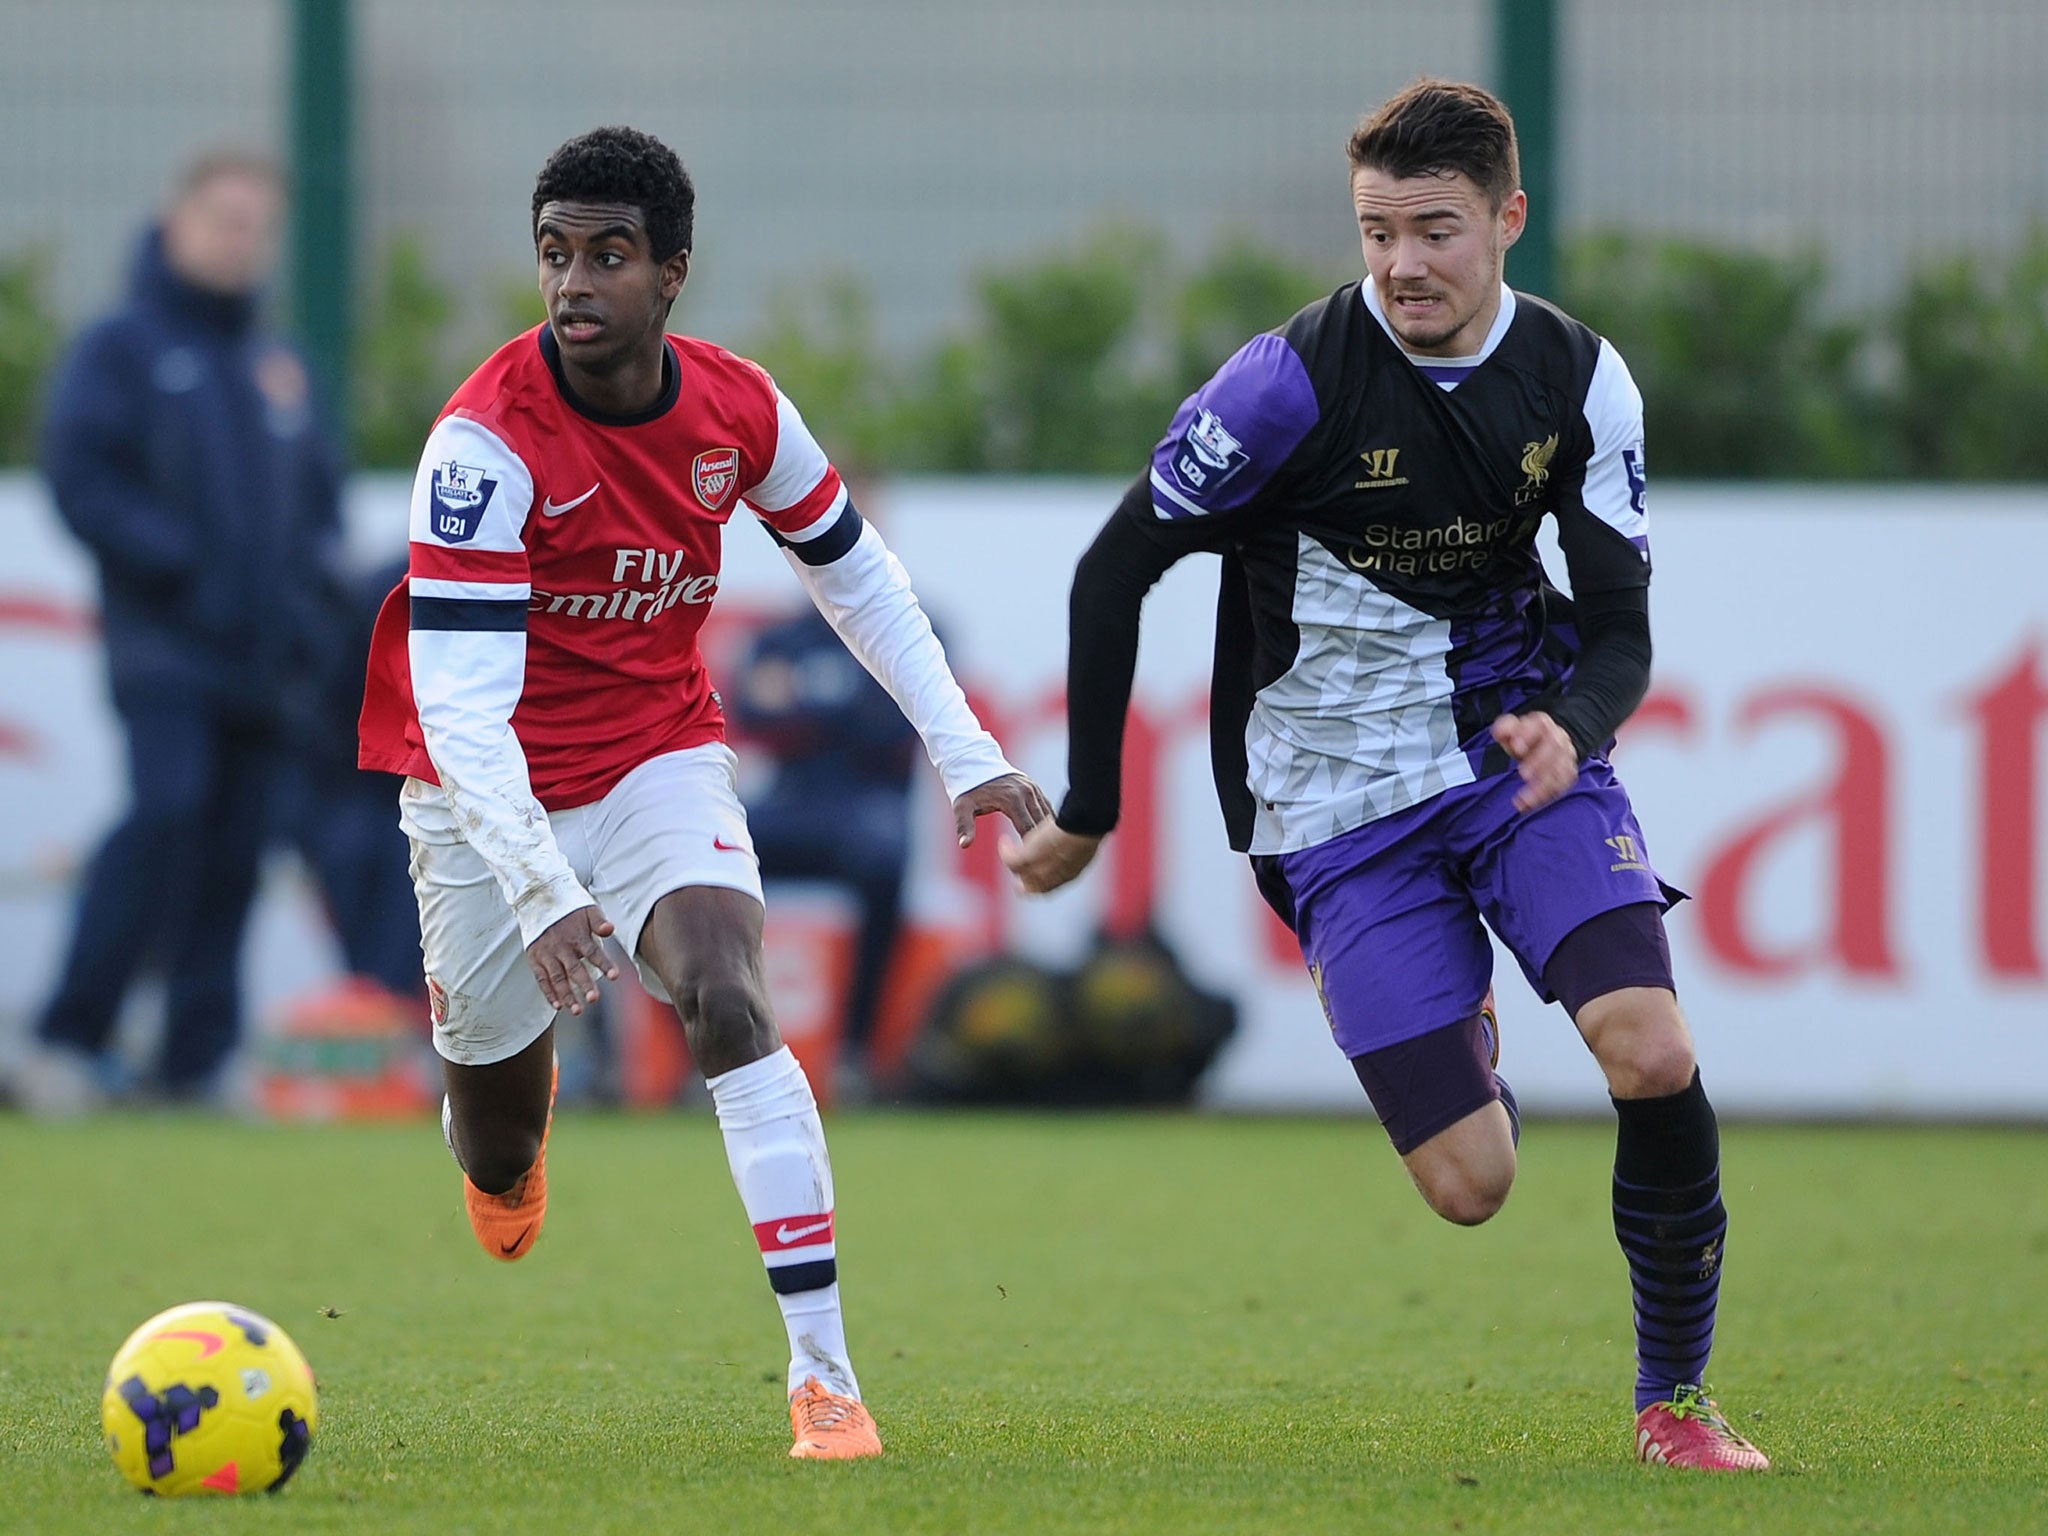 Gedion Zelalem (left) in action for Arsenal Under 21s in their 4-2 defeat by Liverpool Under 21s this week